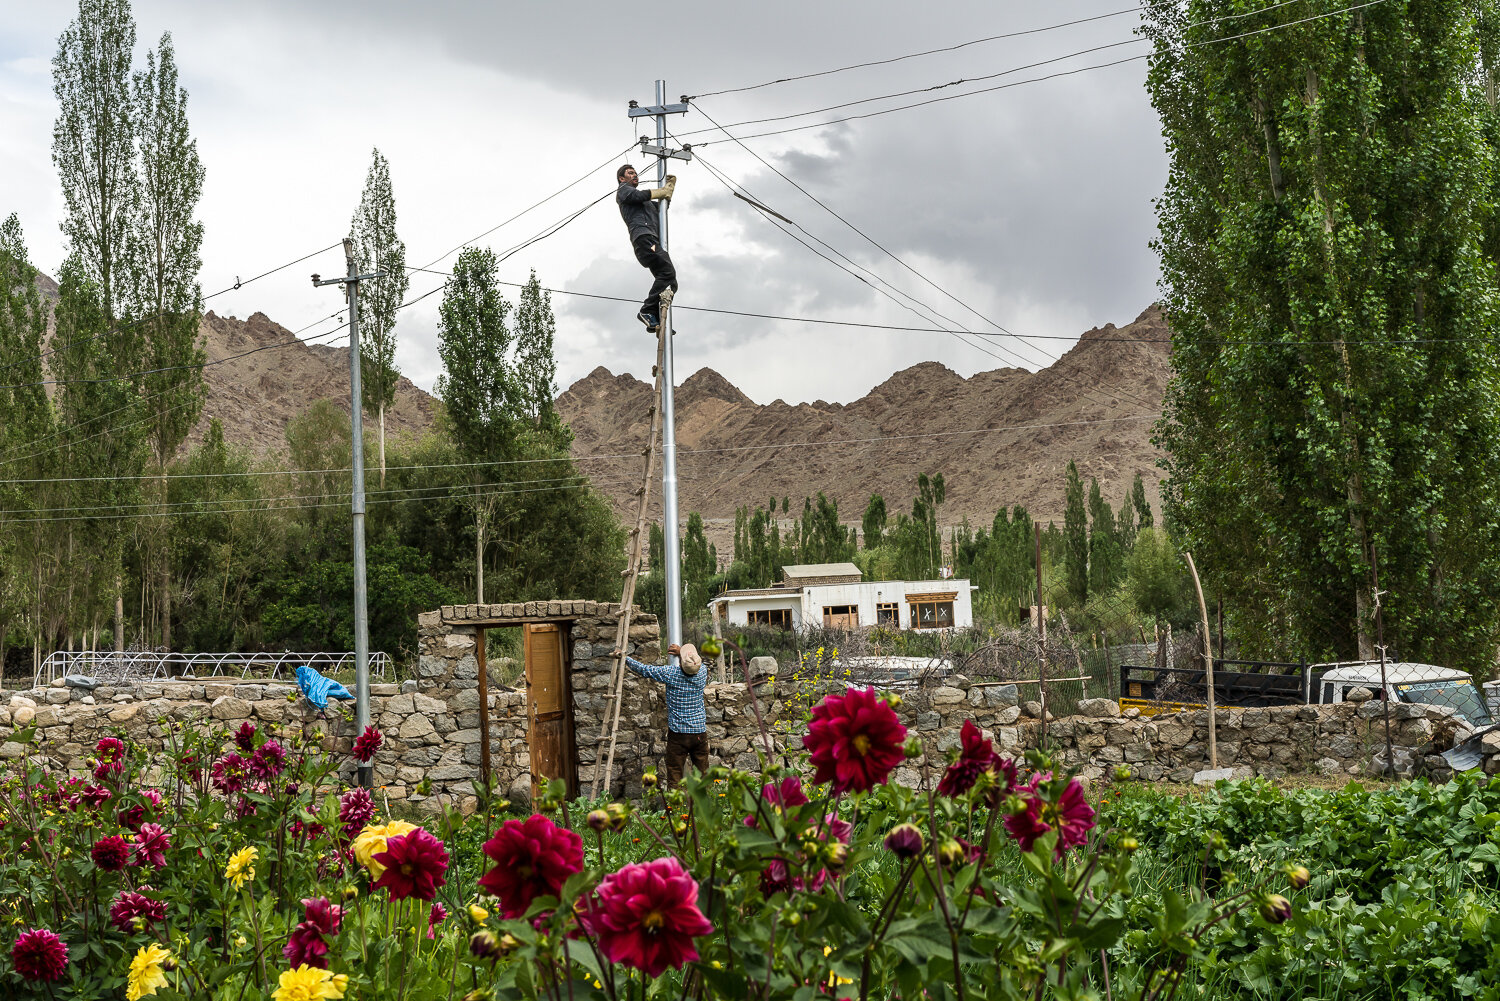  Tashi Motup, on the ladder, and Jigmat Lundup, local linemen, connect electric lines to a house on Tuesday, August 13, 2019 in Saboo, Ladakh, India. India has made a concerted effort in recent years to supply electricity to rural villages all over t